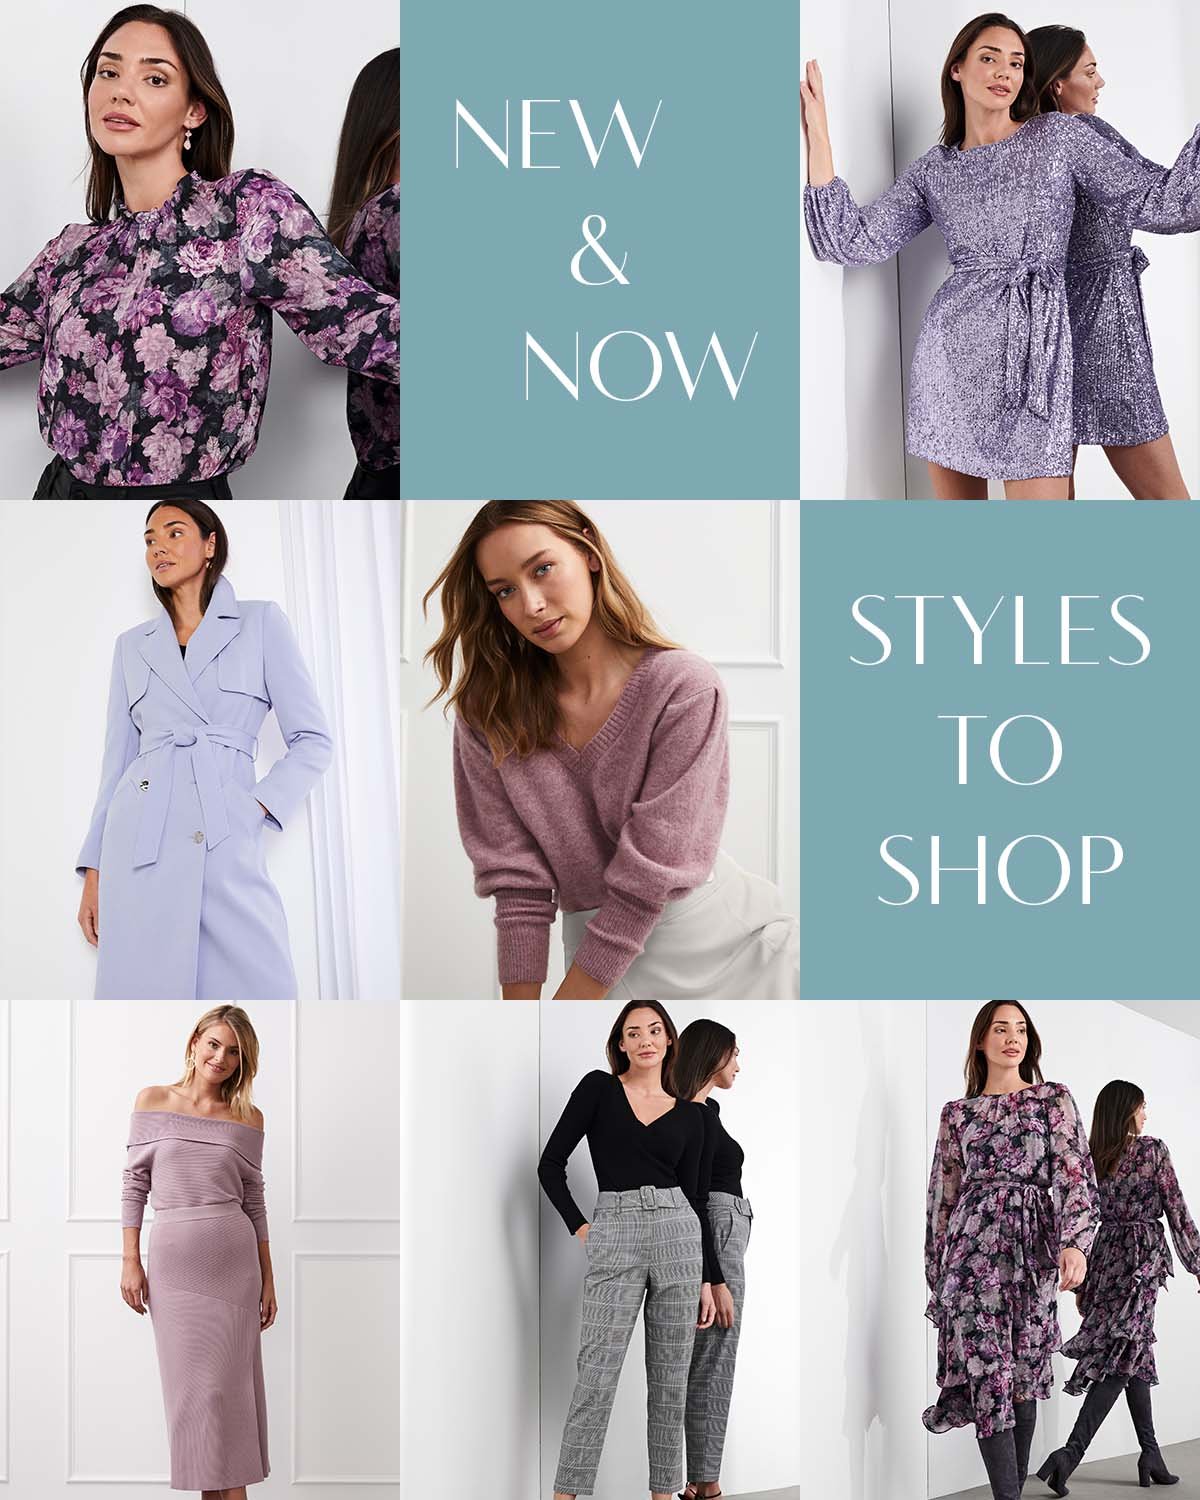 New & Now Styles To Shop.